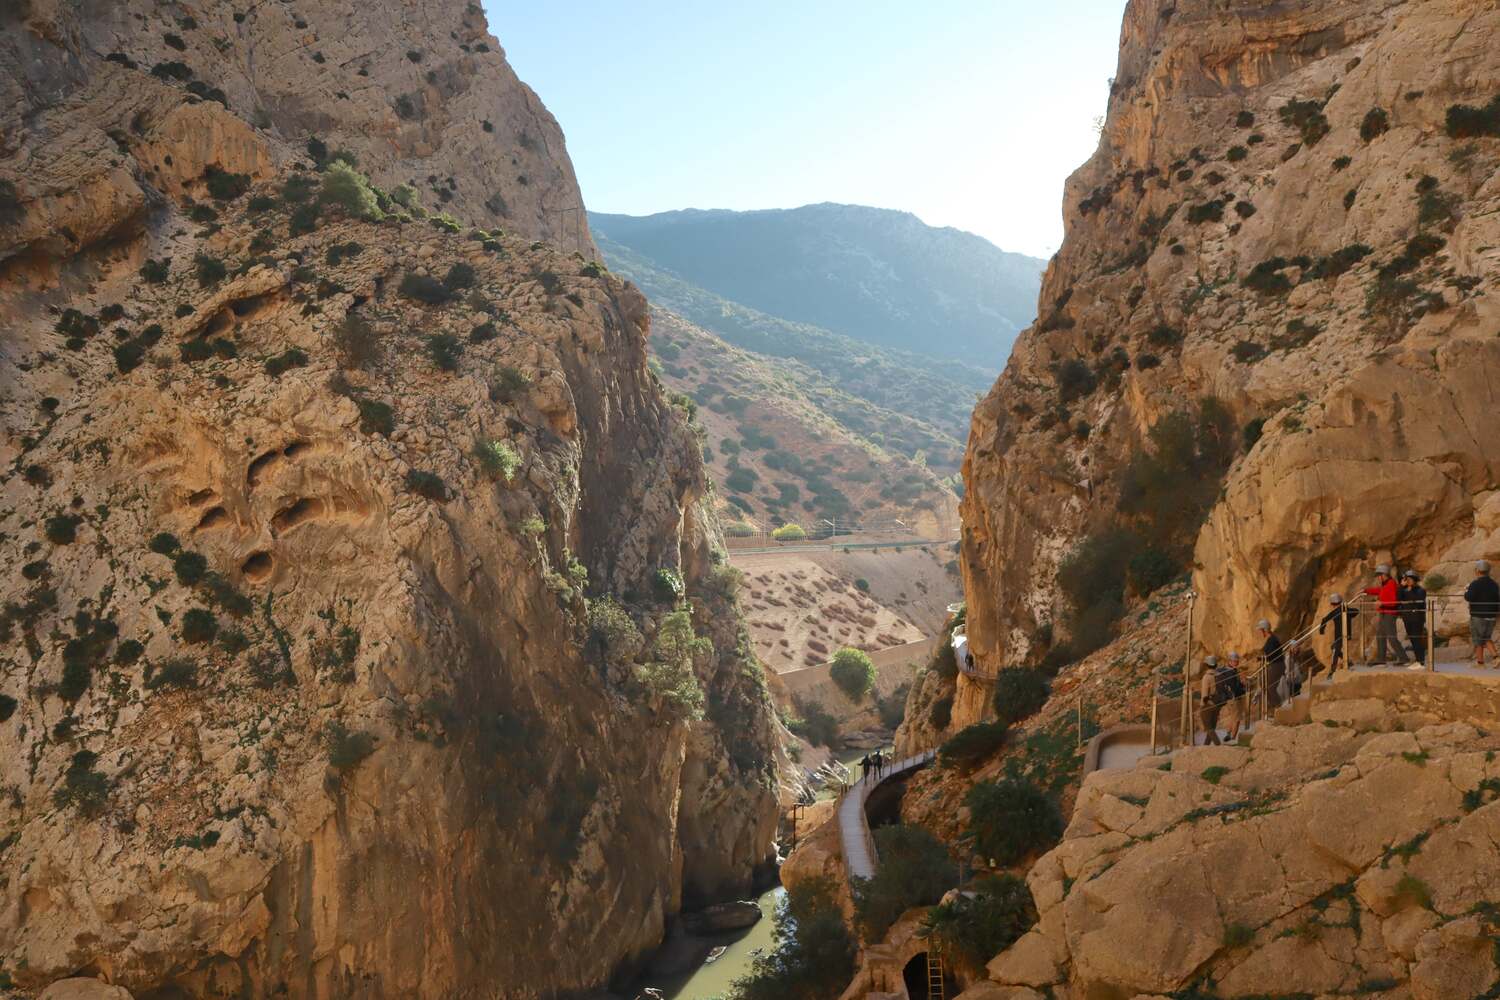 Caminito-Del-Rey-Andalusia 10 Days Spain Itinerary, Narrow trail through the rocky gorge of El Caminito del Rey with hikers in the distance.